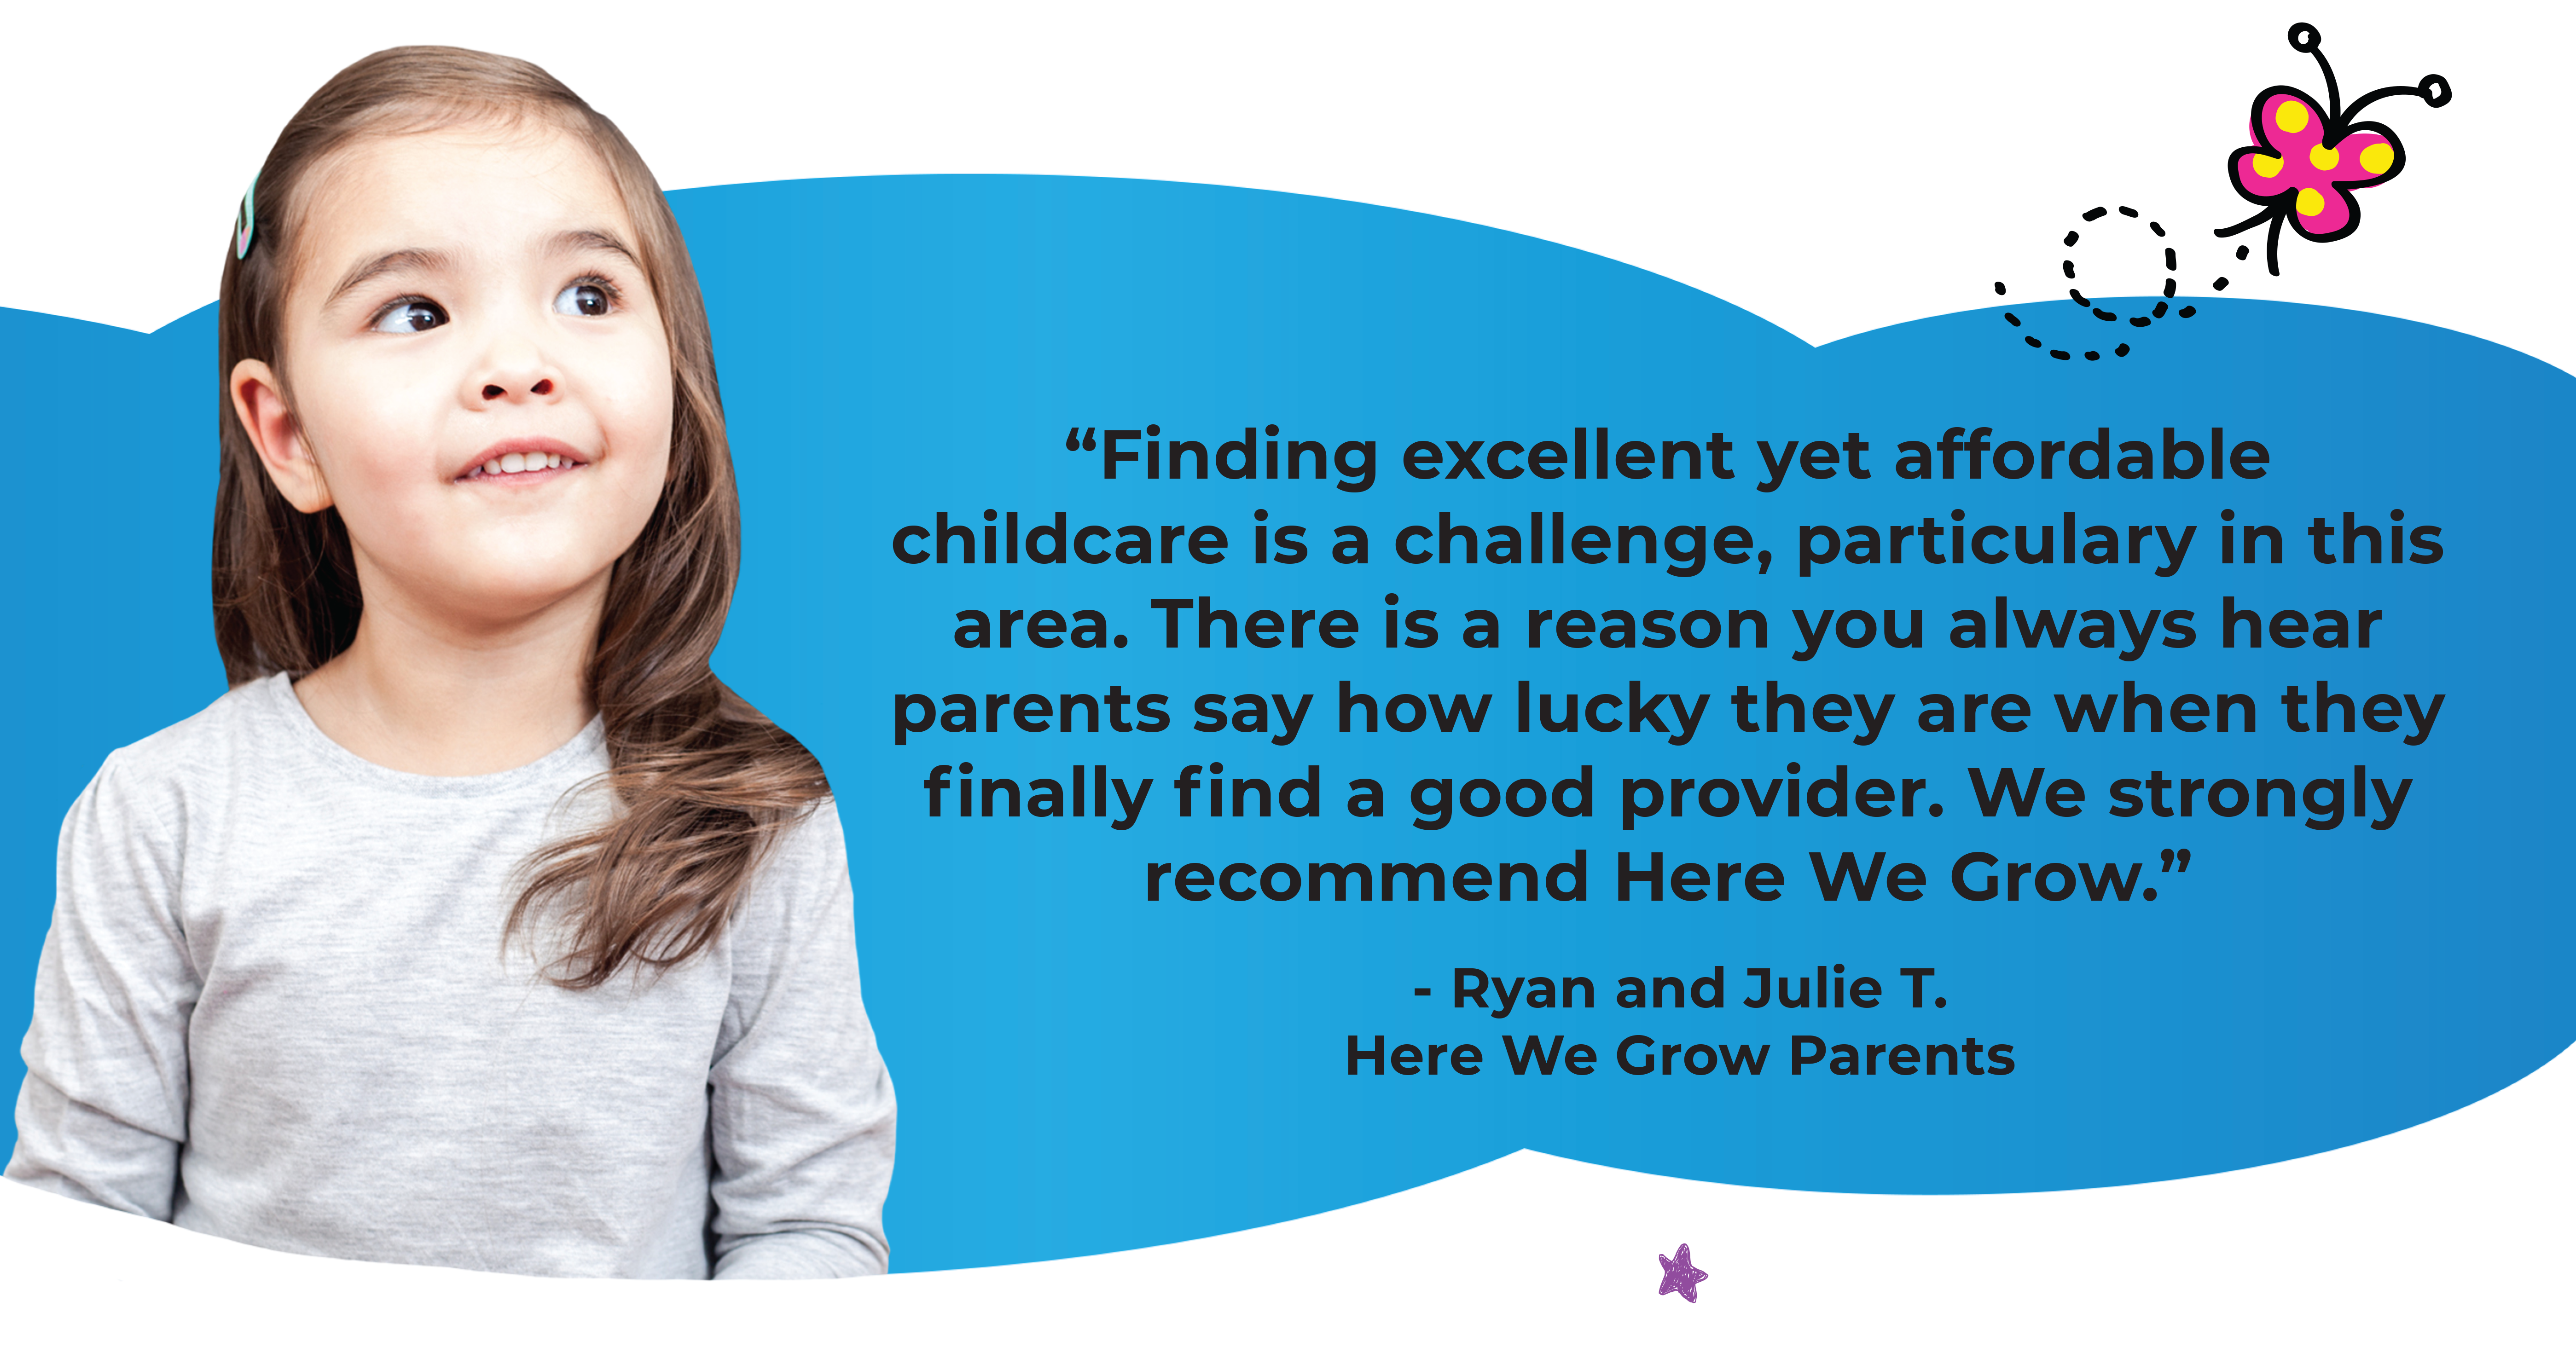 Here We Grow Early Childhood Center